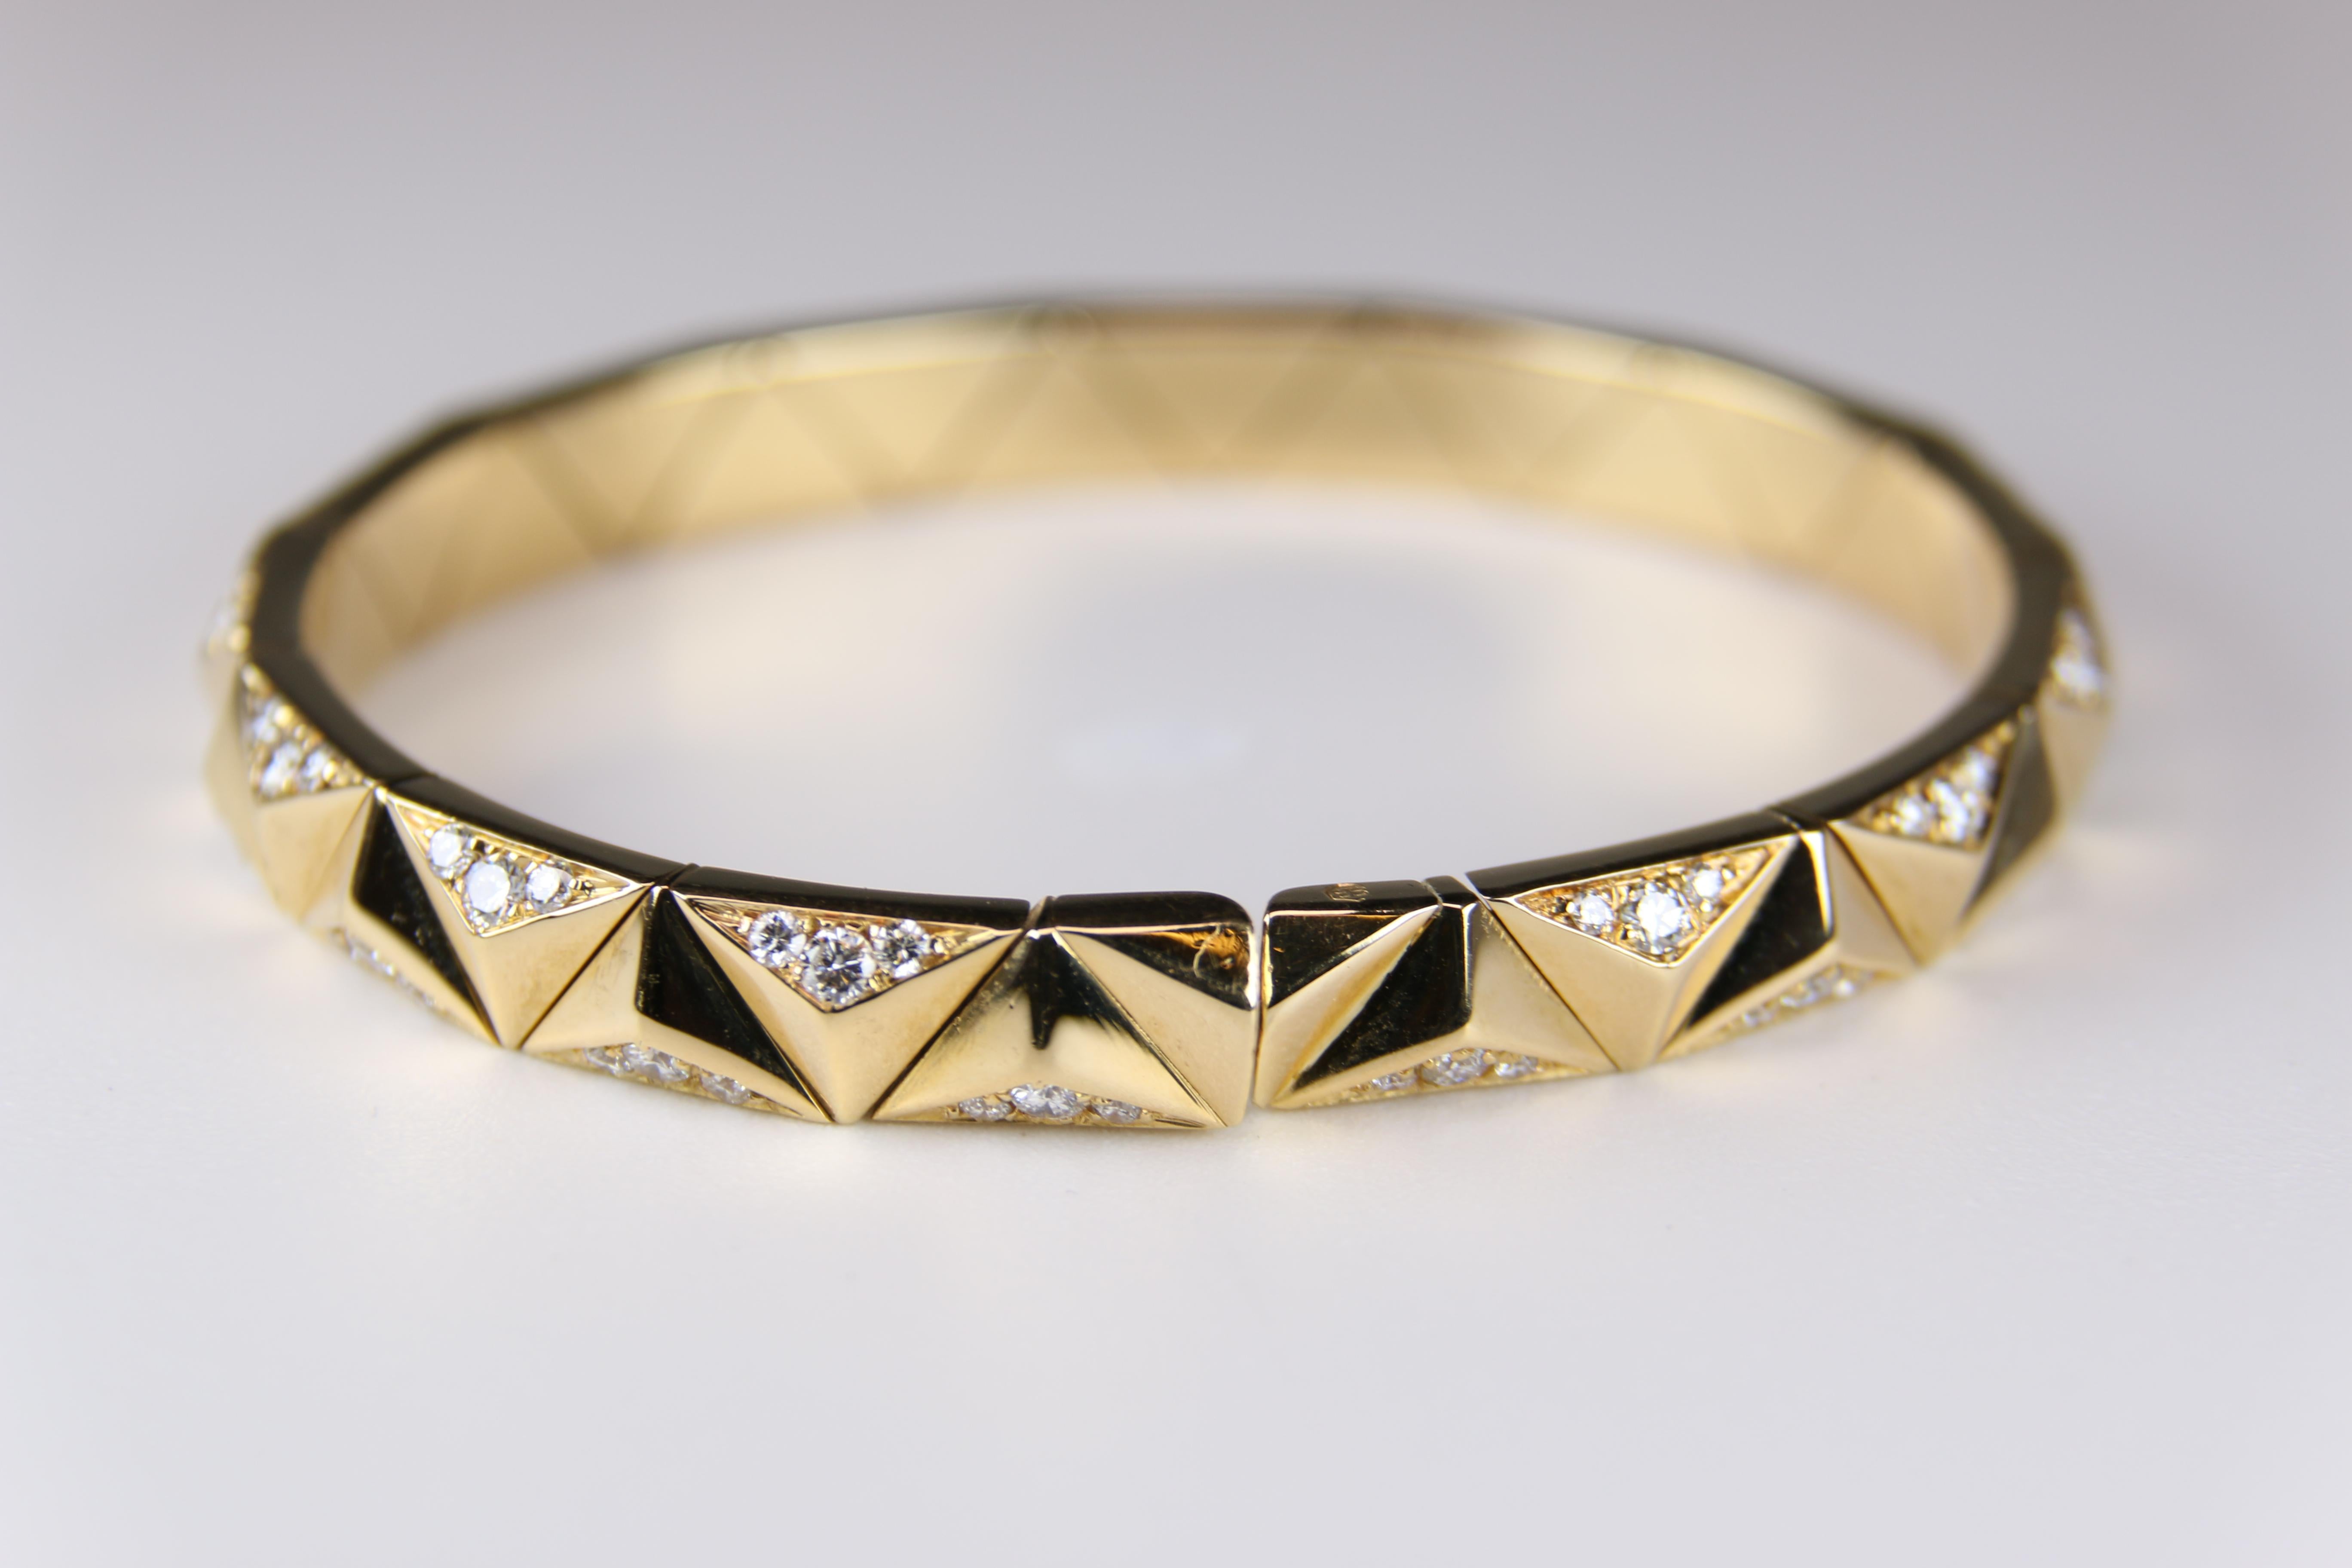 This Bulgari Designer 18K Yellow Gold and Diamond Flexible Cuff Bracelet has a serpentine zig/zag pattern with triangular links which are alternately pave set with round brilliant cut diamonds having an estimated 0.85 carat of total diamond weight. 